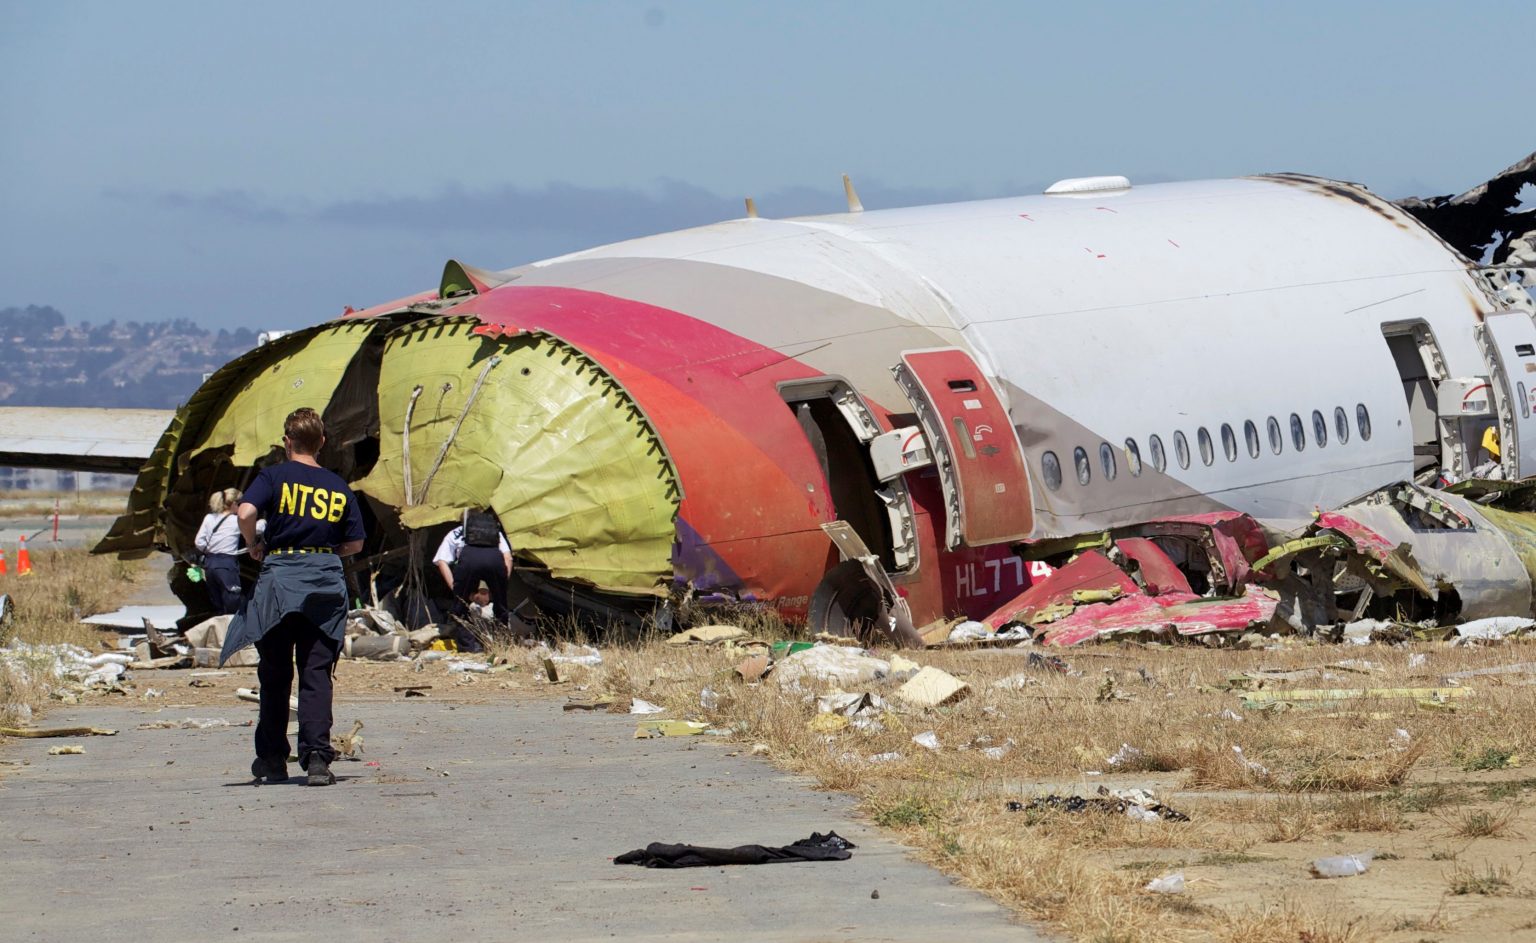 Asiana-Airlines-plane-crash-in-San-Fransico-in-2013-photo-NTSB-2-1536x943